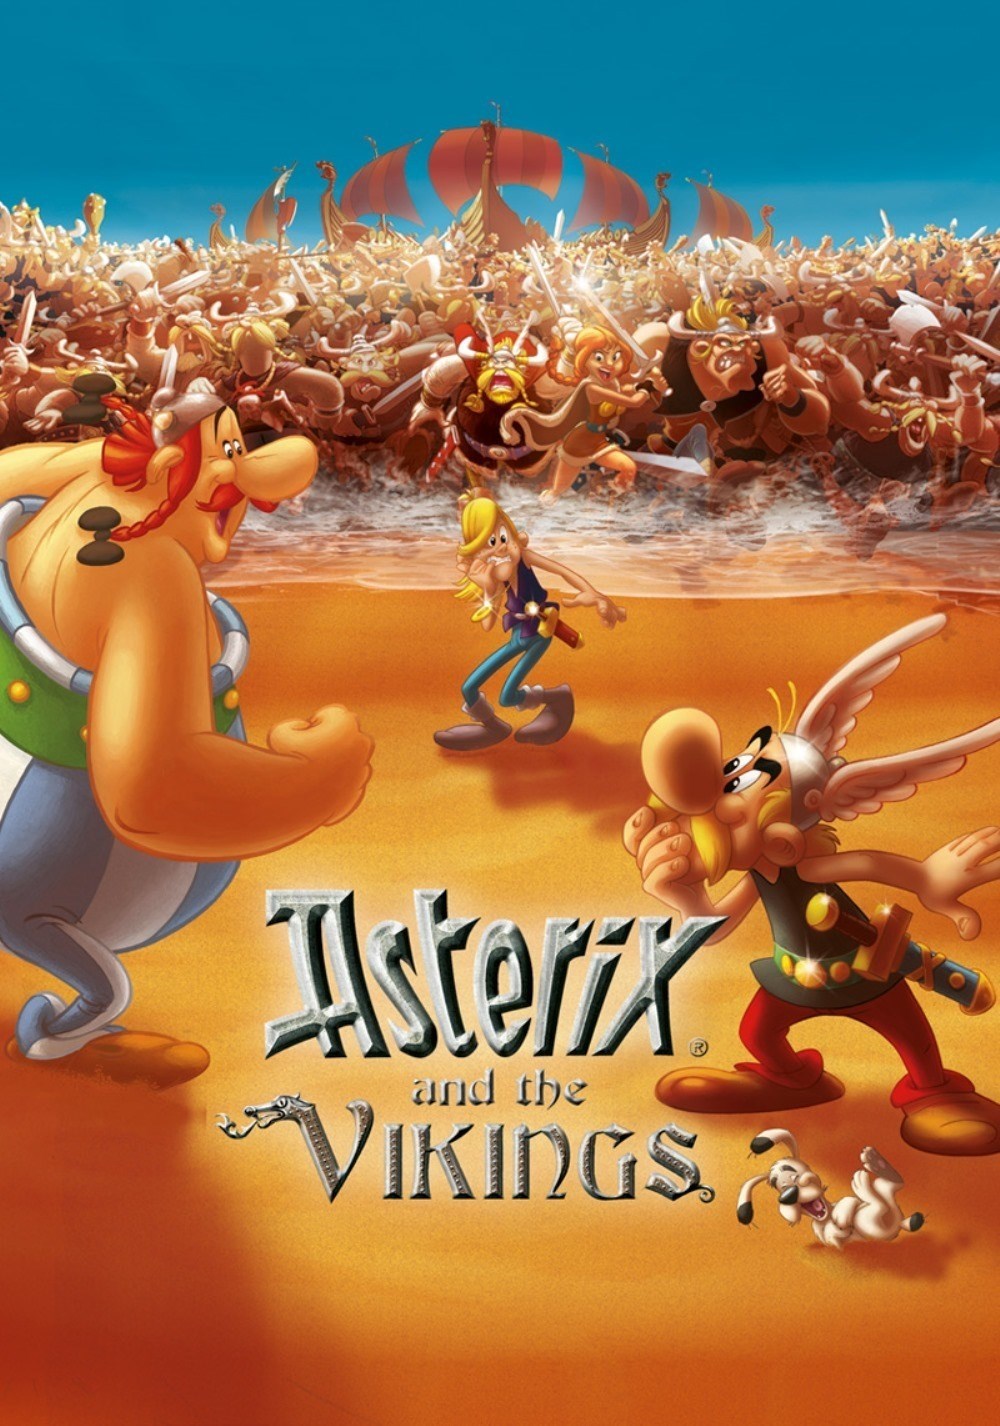 asterix-and-the-vikings-2006